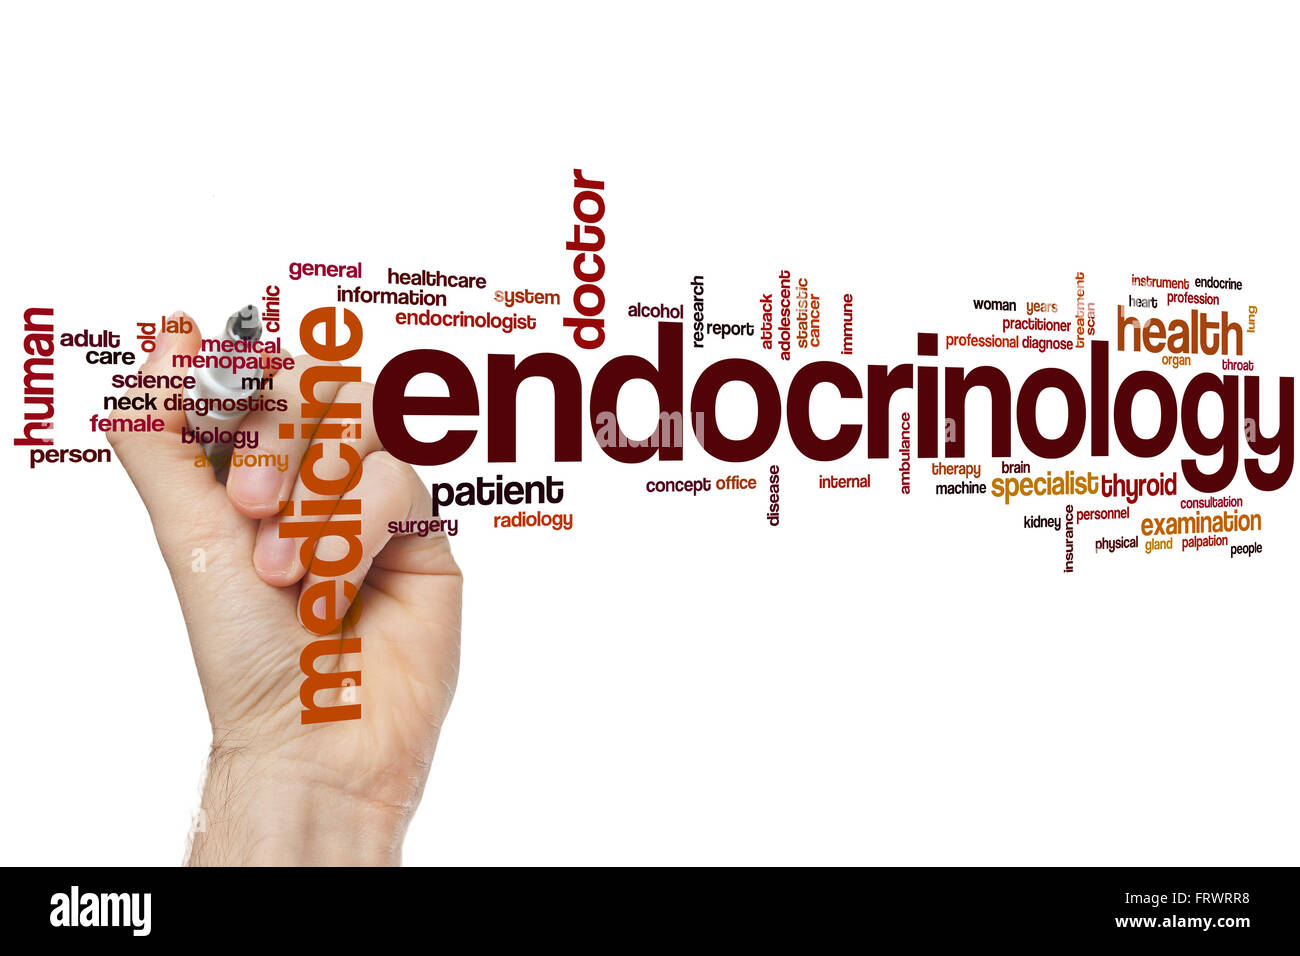 Endocrinology word cloud concept Stock Photo